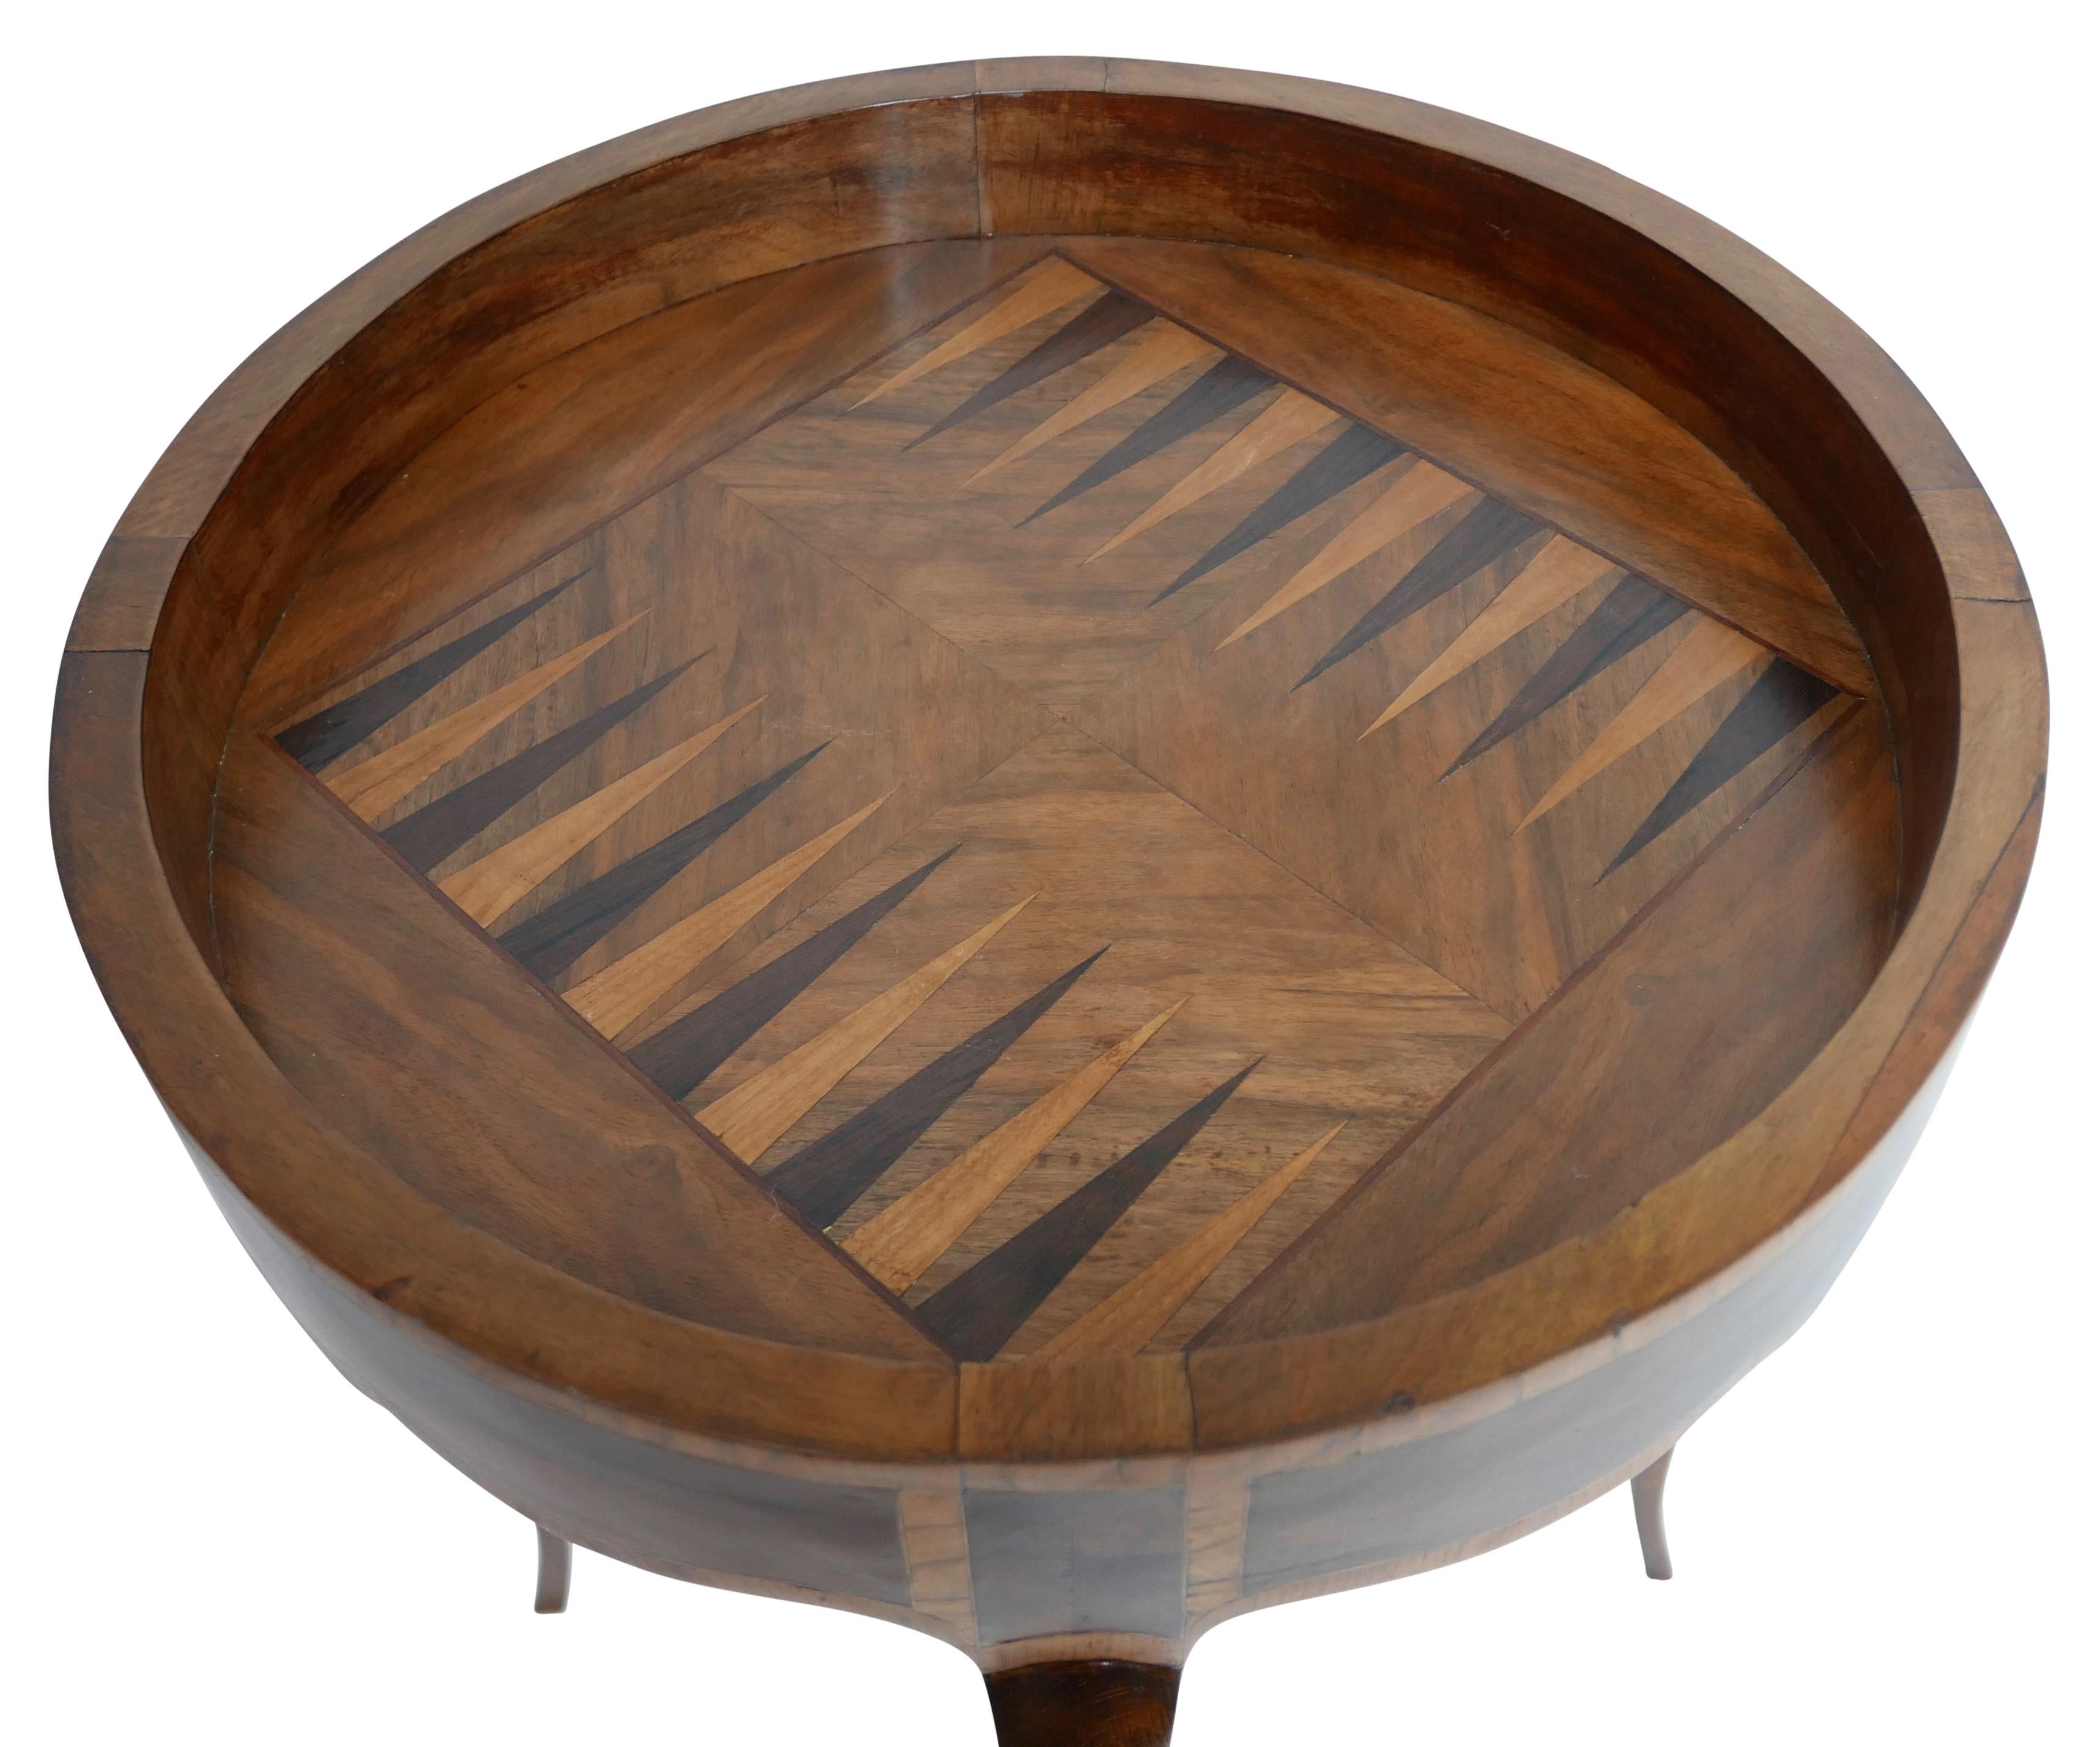 Walnut Circular Tric Trac Game Table with Fruitwood Inlay, Mid-19th Century 5